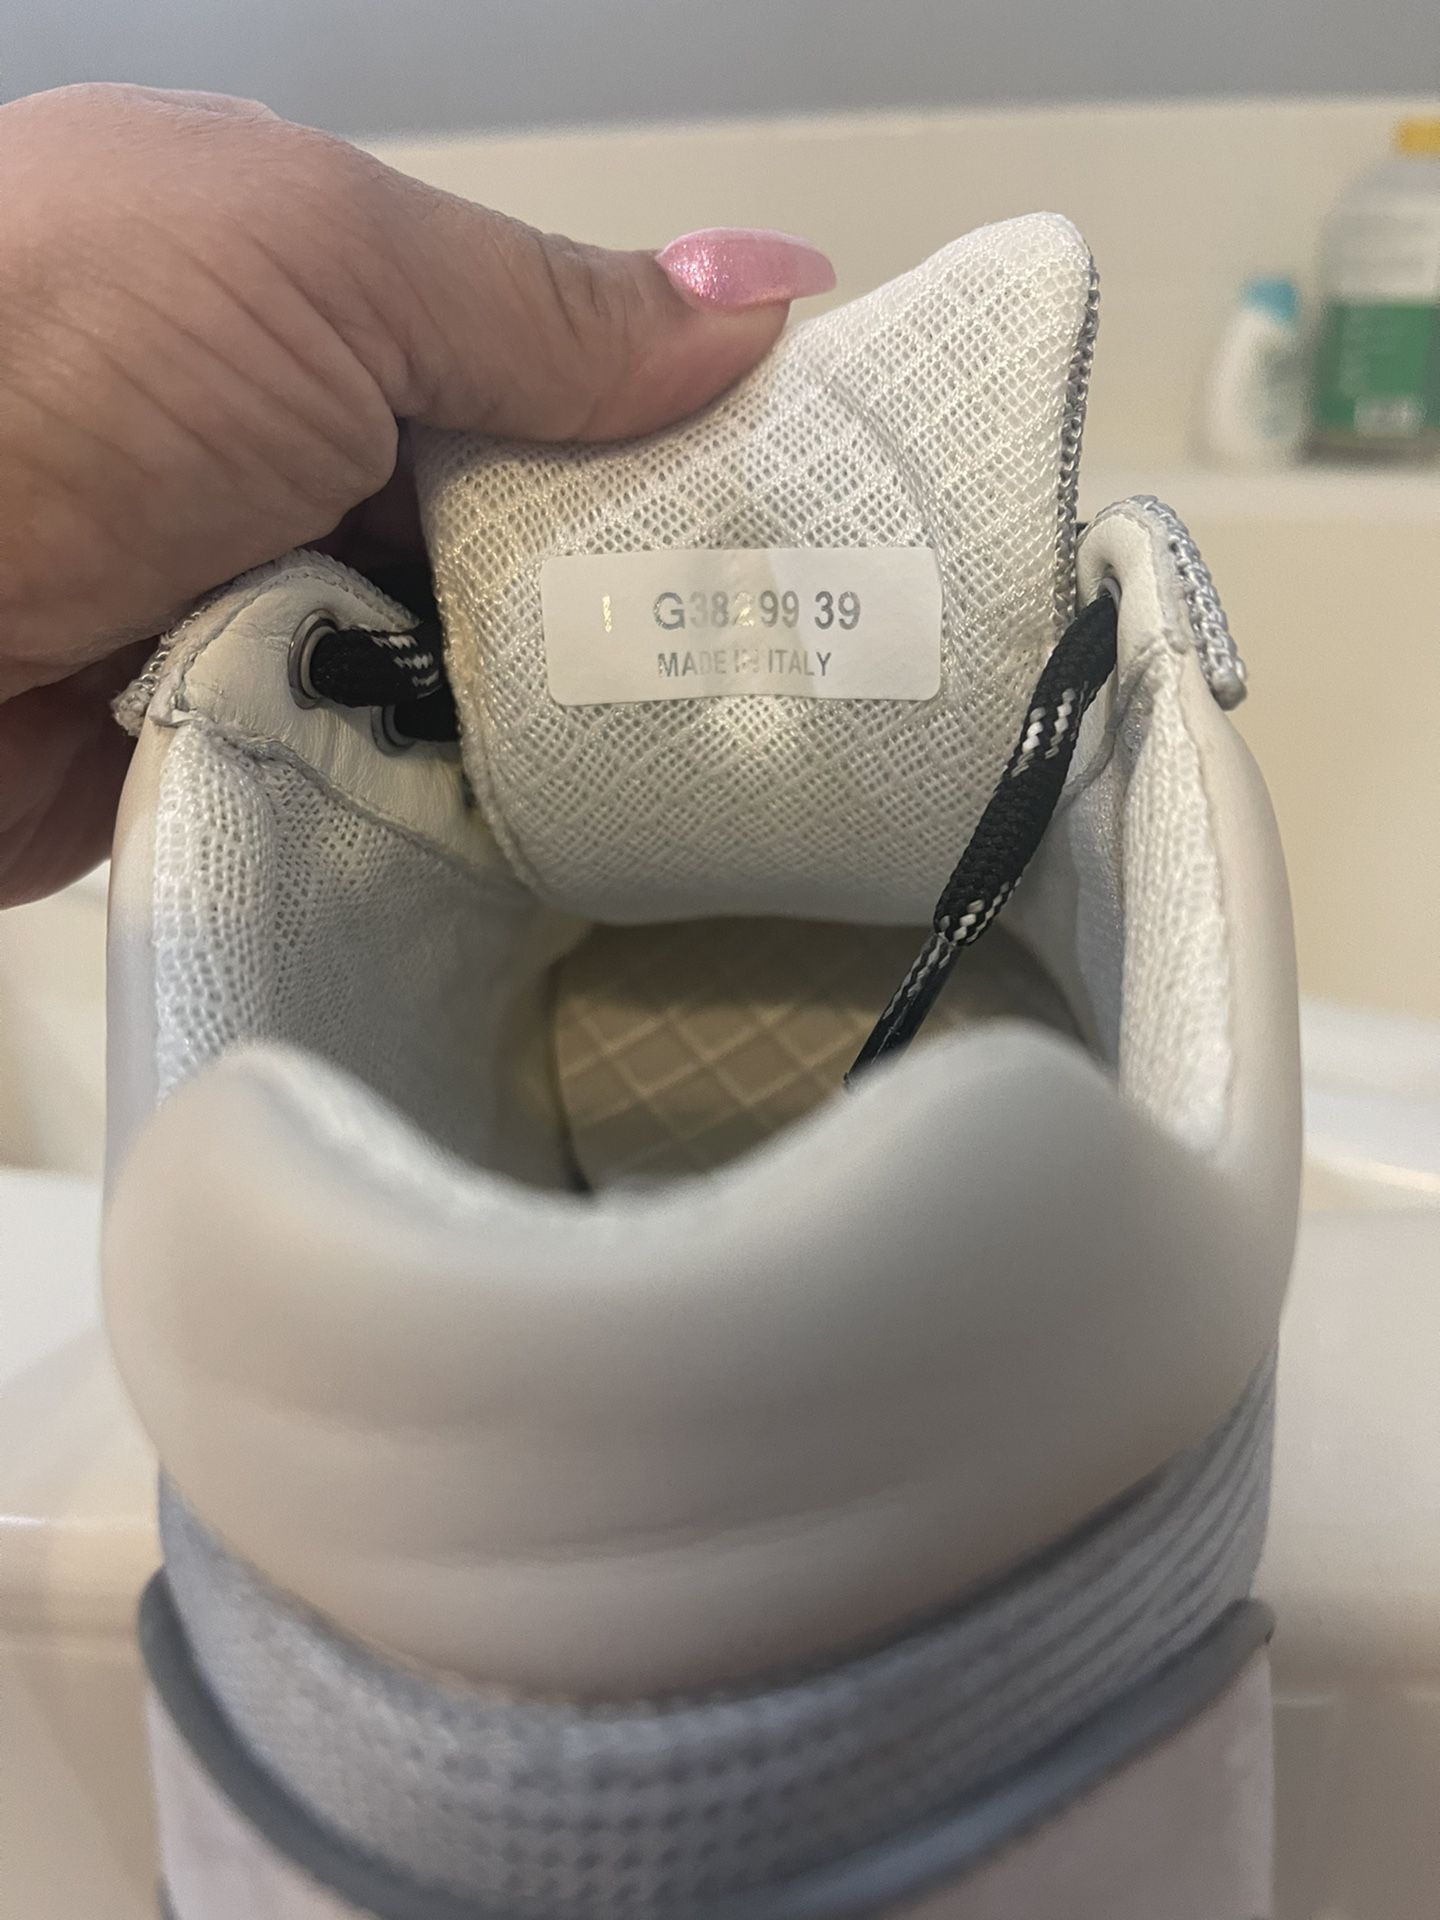 Chanel Sneakers for Sale in Corona, CA - OfferUp